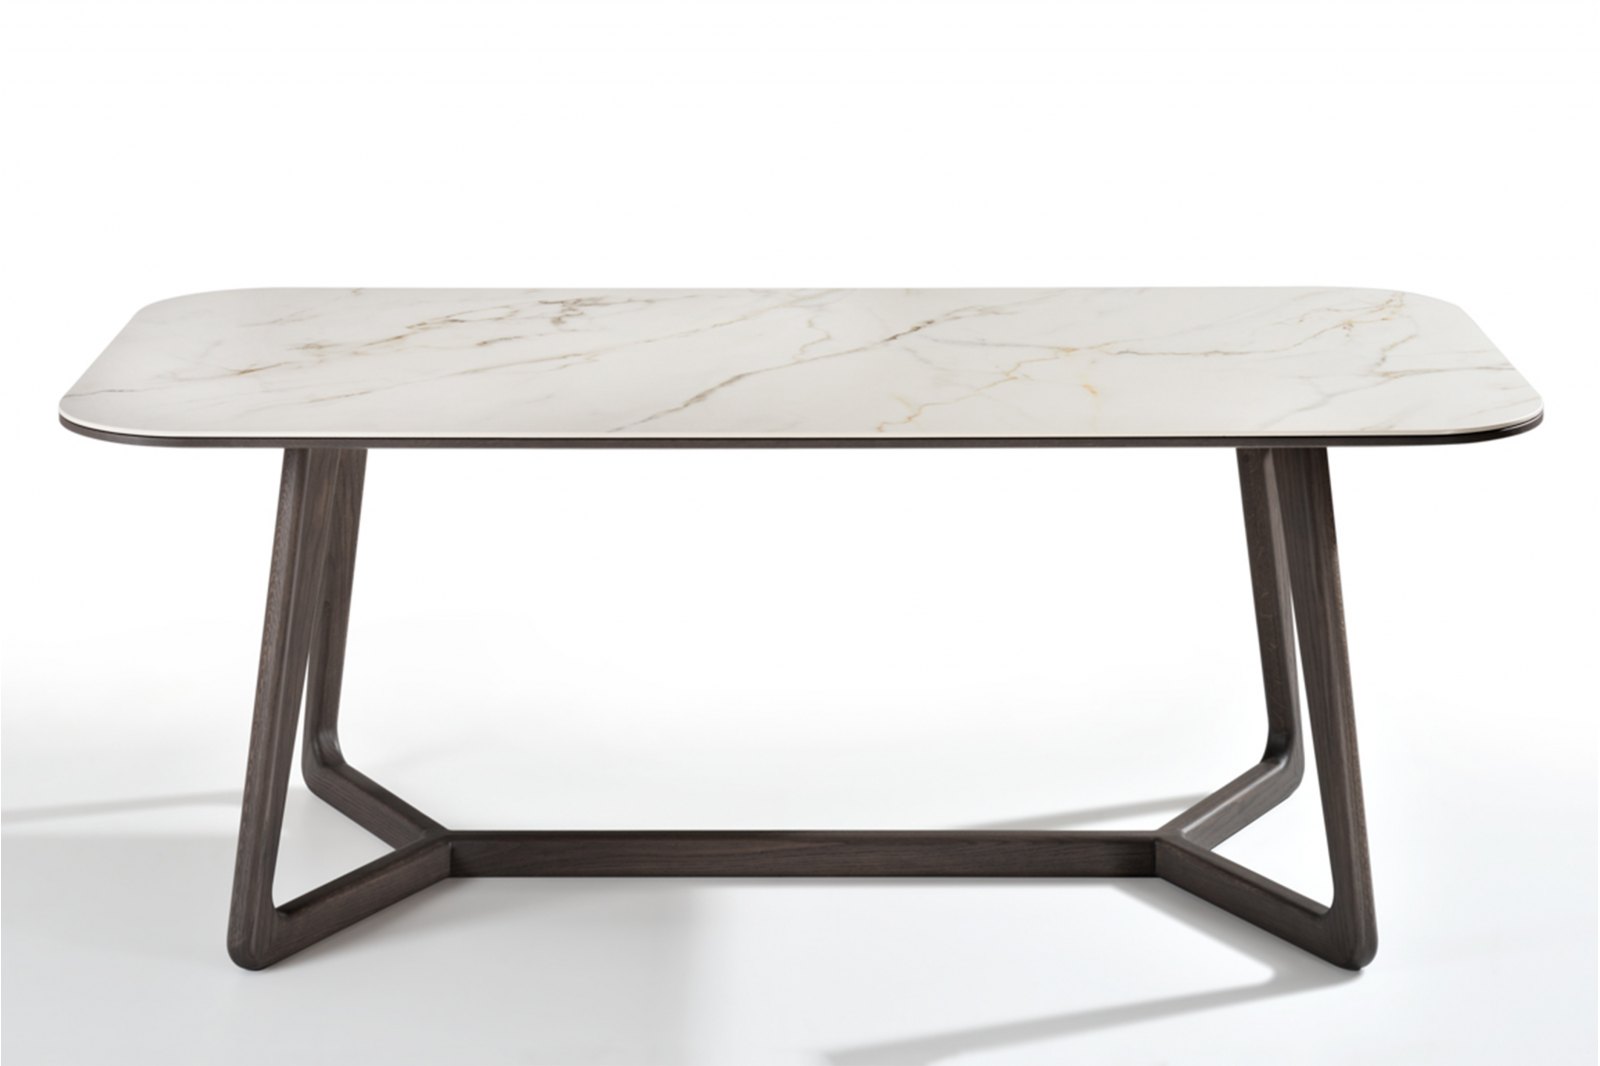 Totem Marble-effect Ceramic Top Dining Table 220cm / 1